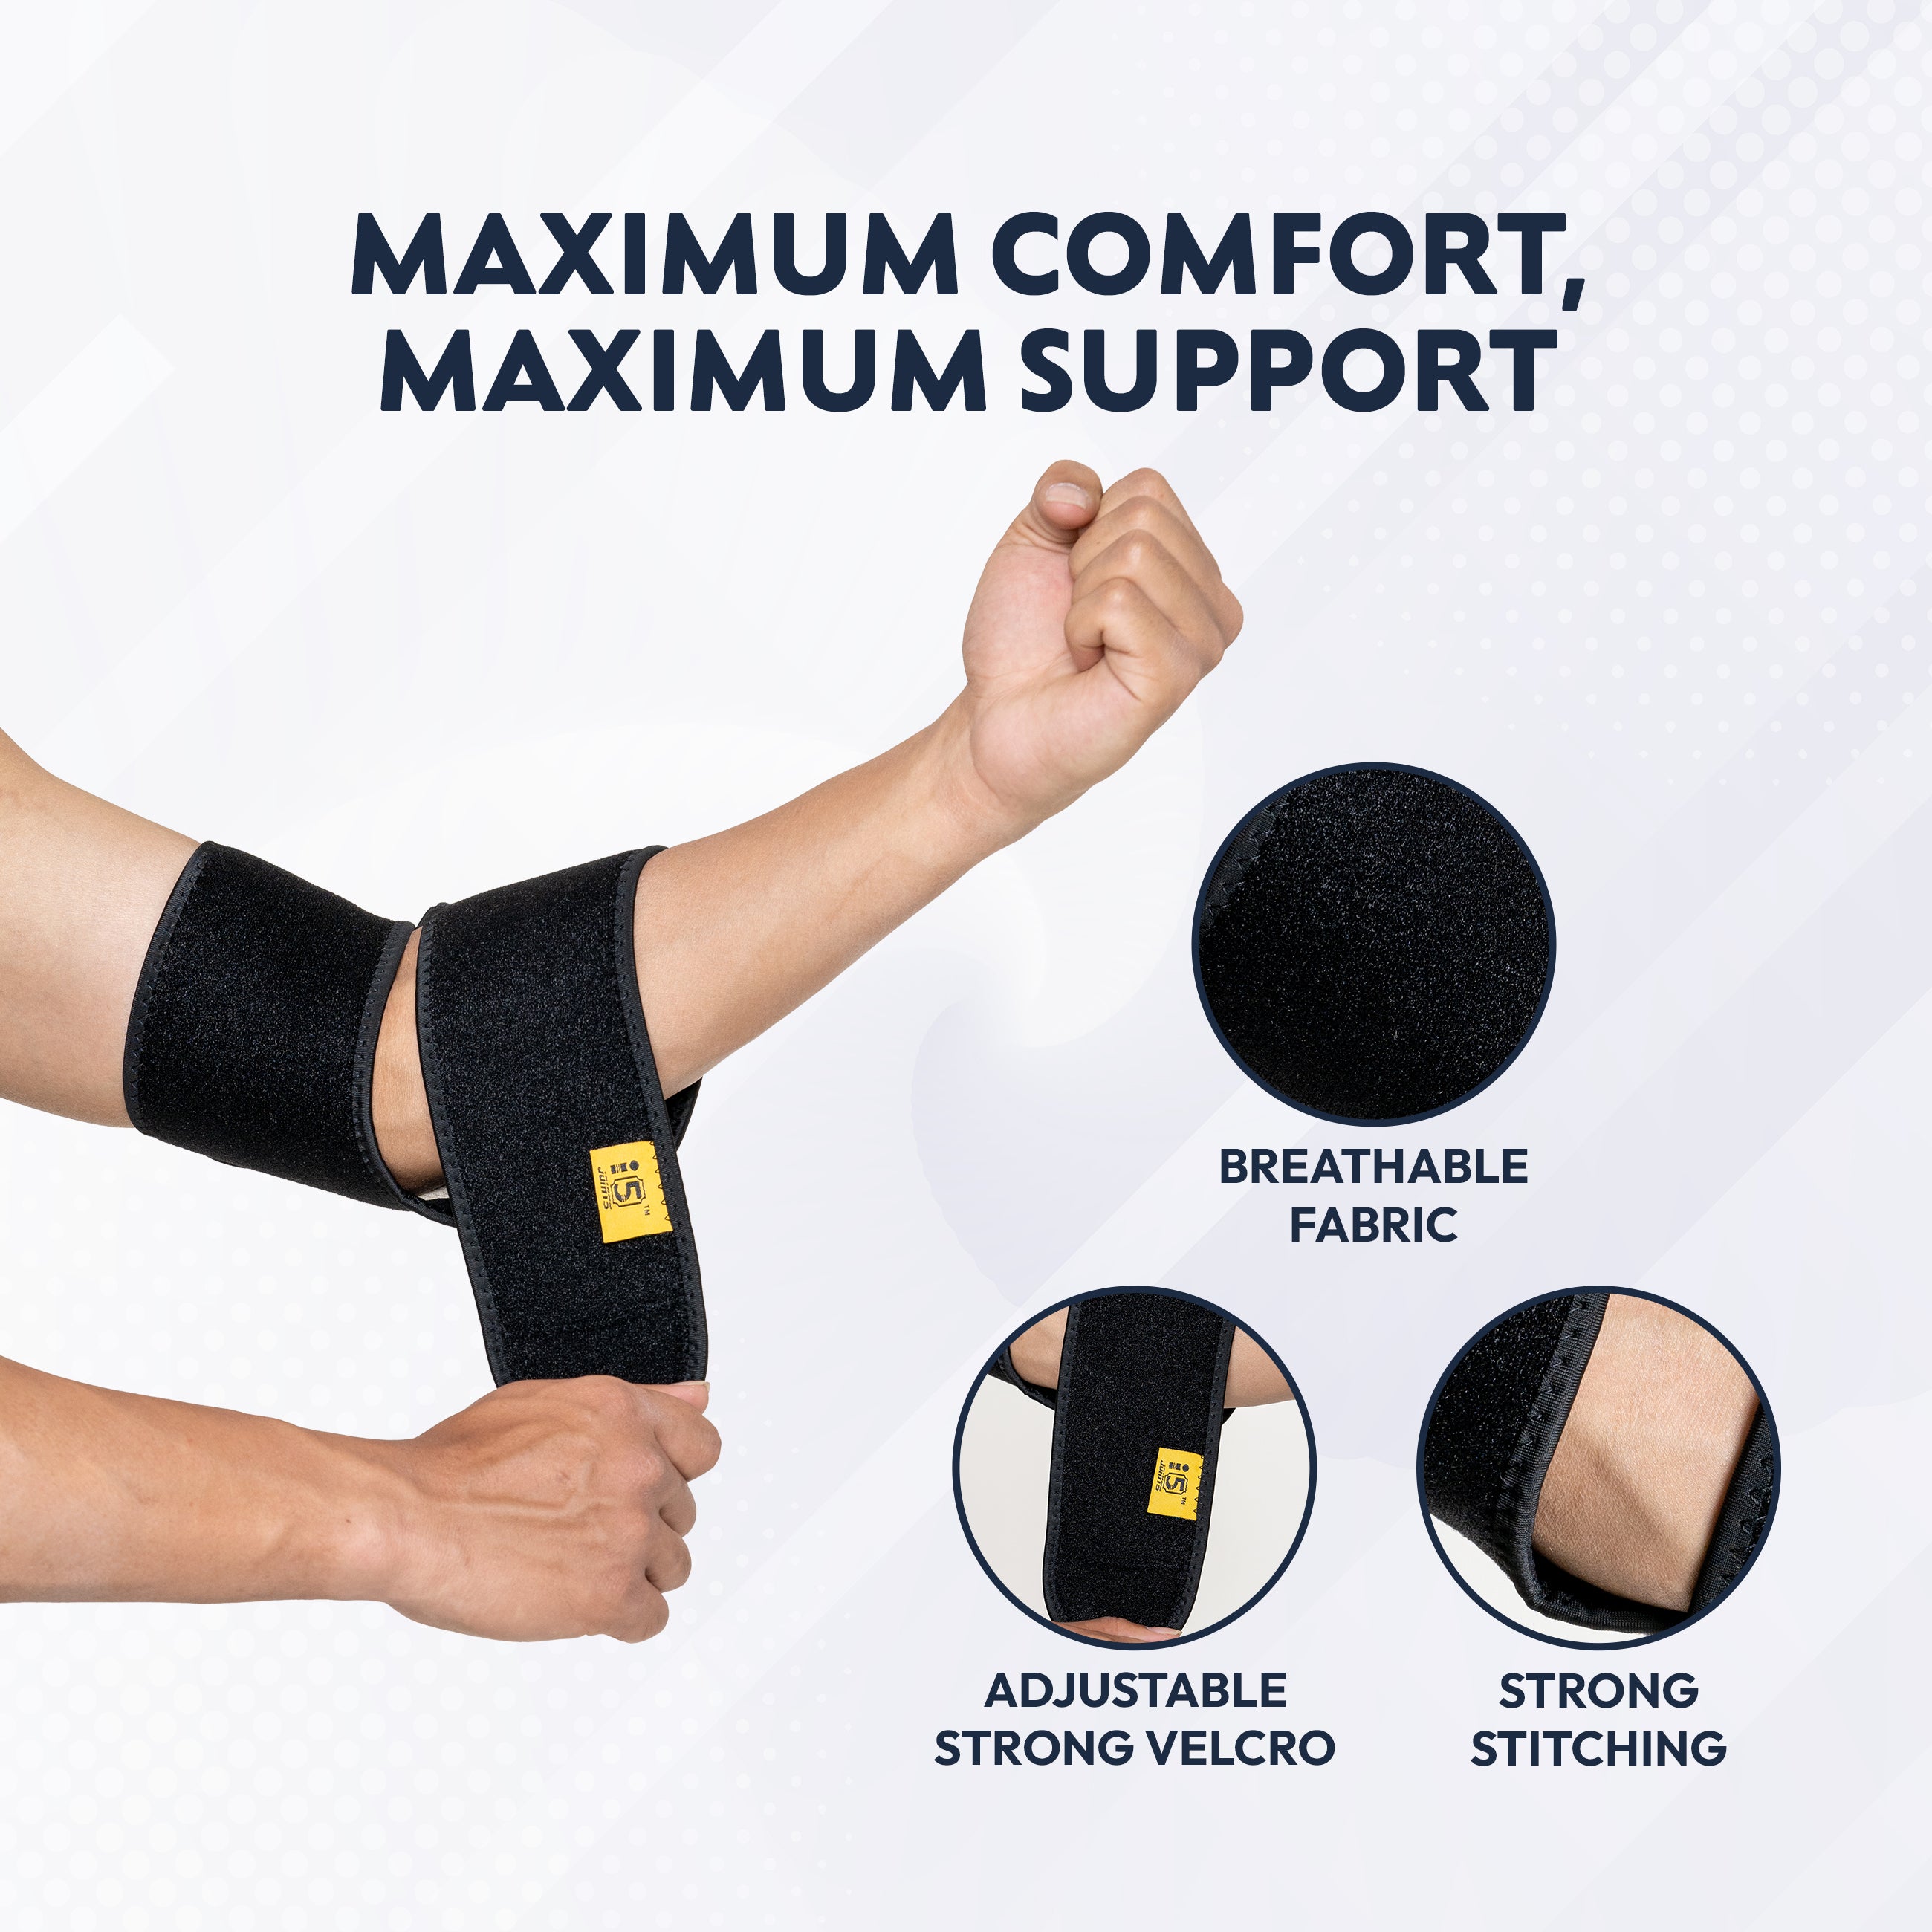 I5Joints – Infrared Elbow Compression Belt(I5Joints Elbow Support For Gym Elbow Band For Pain Relief, For Men & Women Tennis Elbow Support For Badminton Cricket & Sports Elbow Sleeves/Elbow Guard/Elbow Brace)